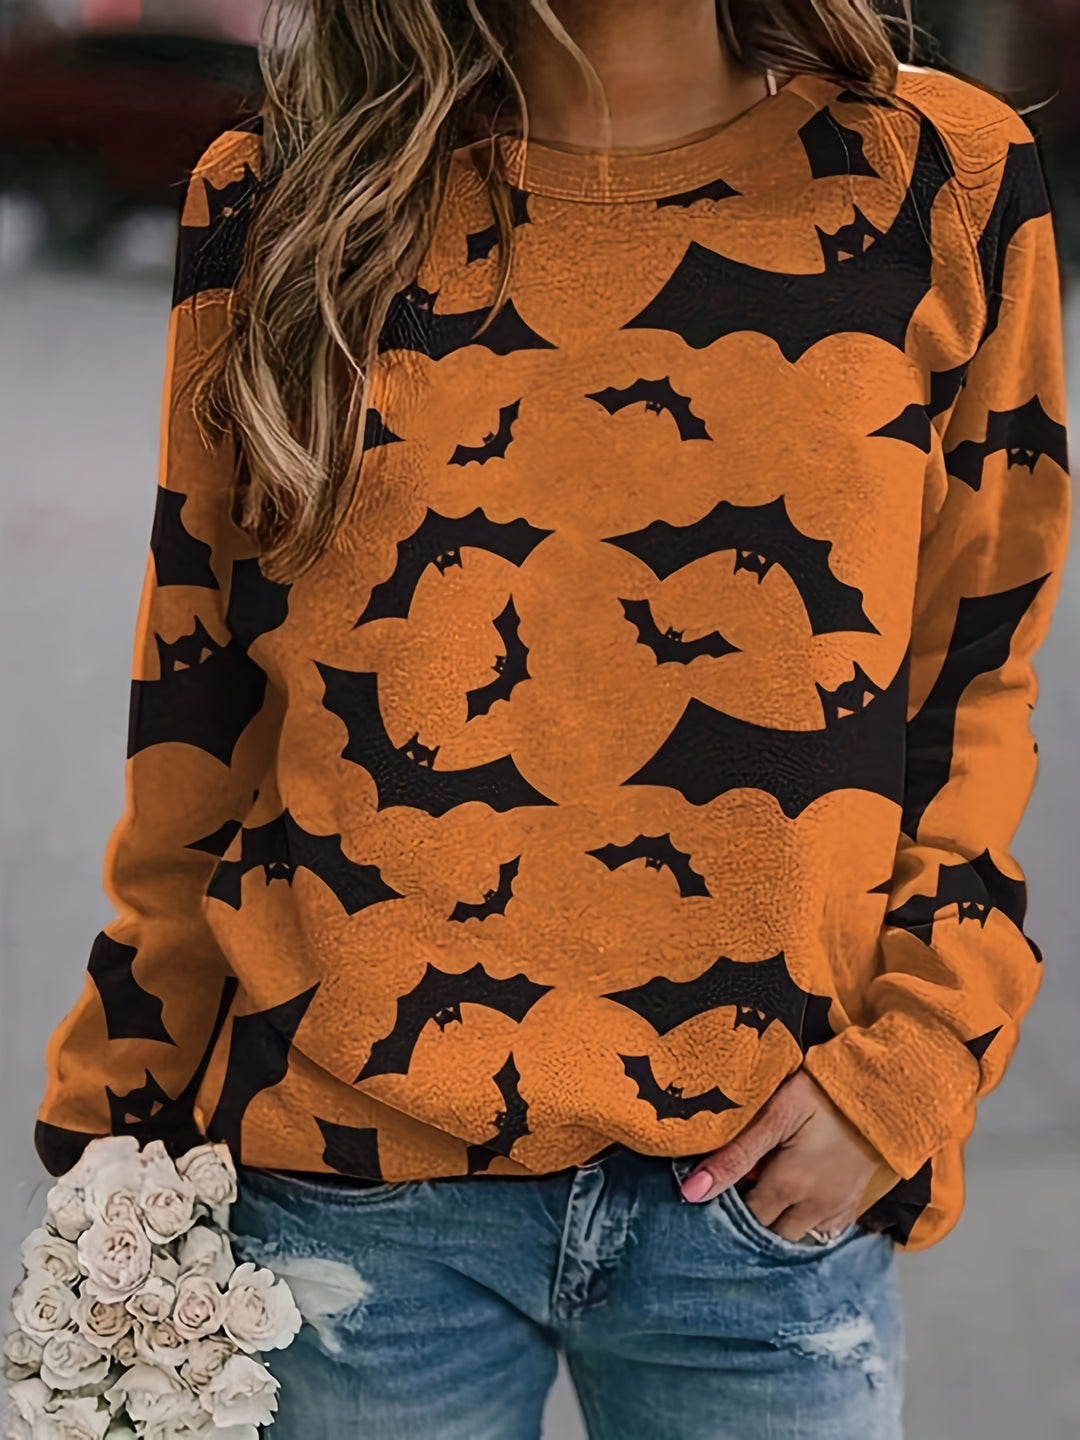 Bat Print Crew Neck T-Shirt, Casual Long Sleeve Top For Spring & Fall, Women's Clothing